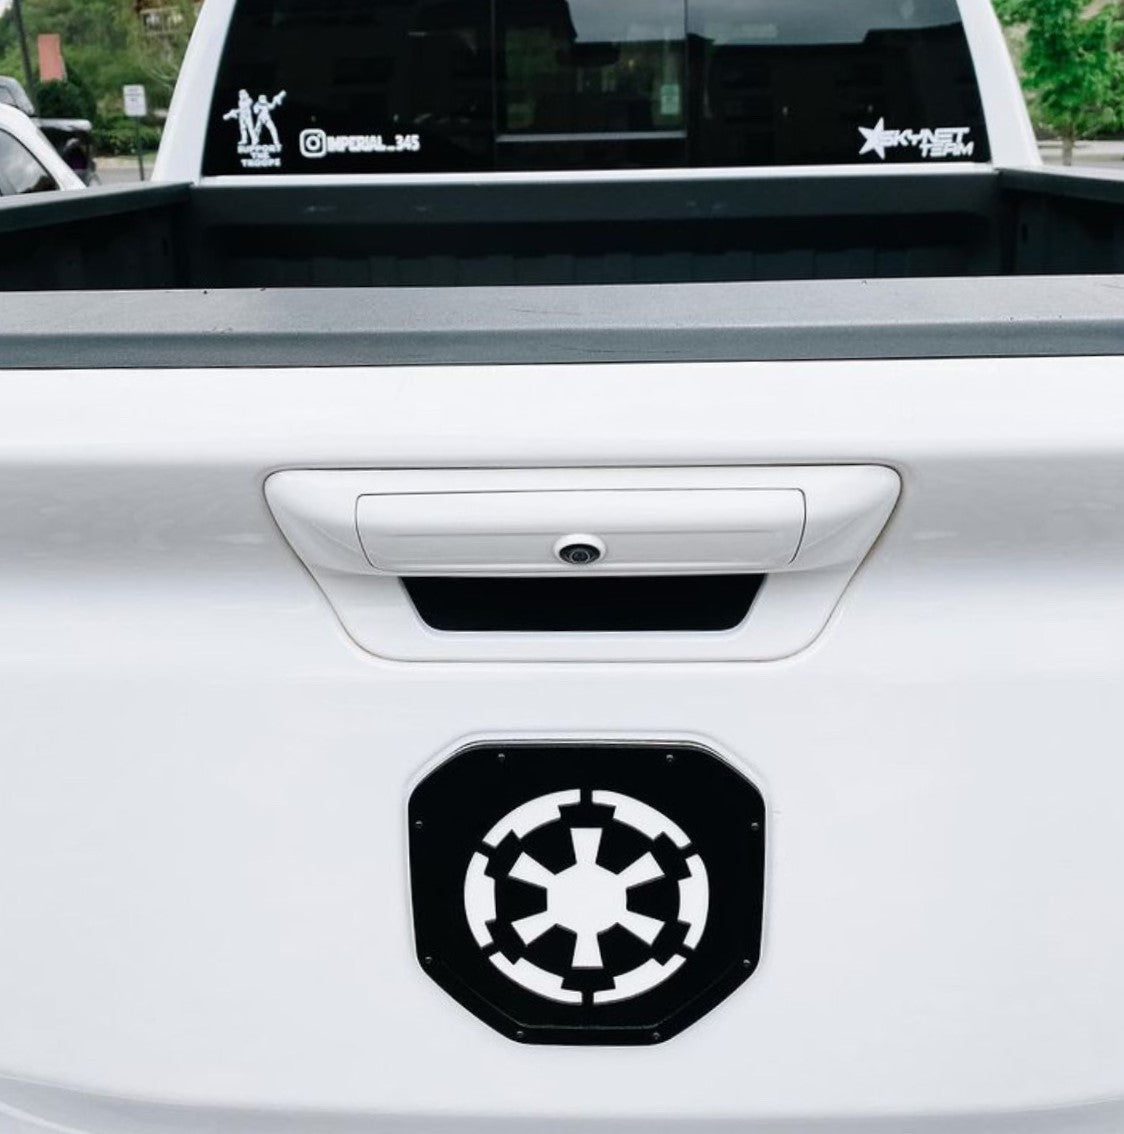 Galactic Insignia Shield Emblem - RAM® Trucks, Grille and Tailgate - Fits Multiple Models and Years